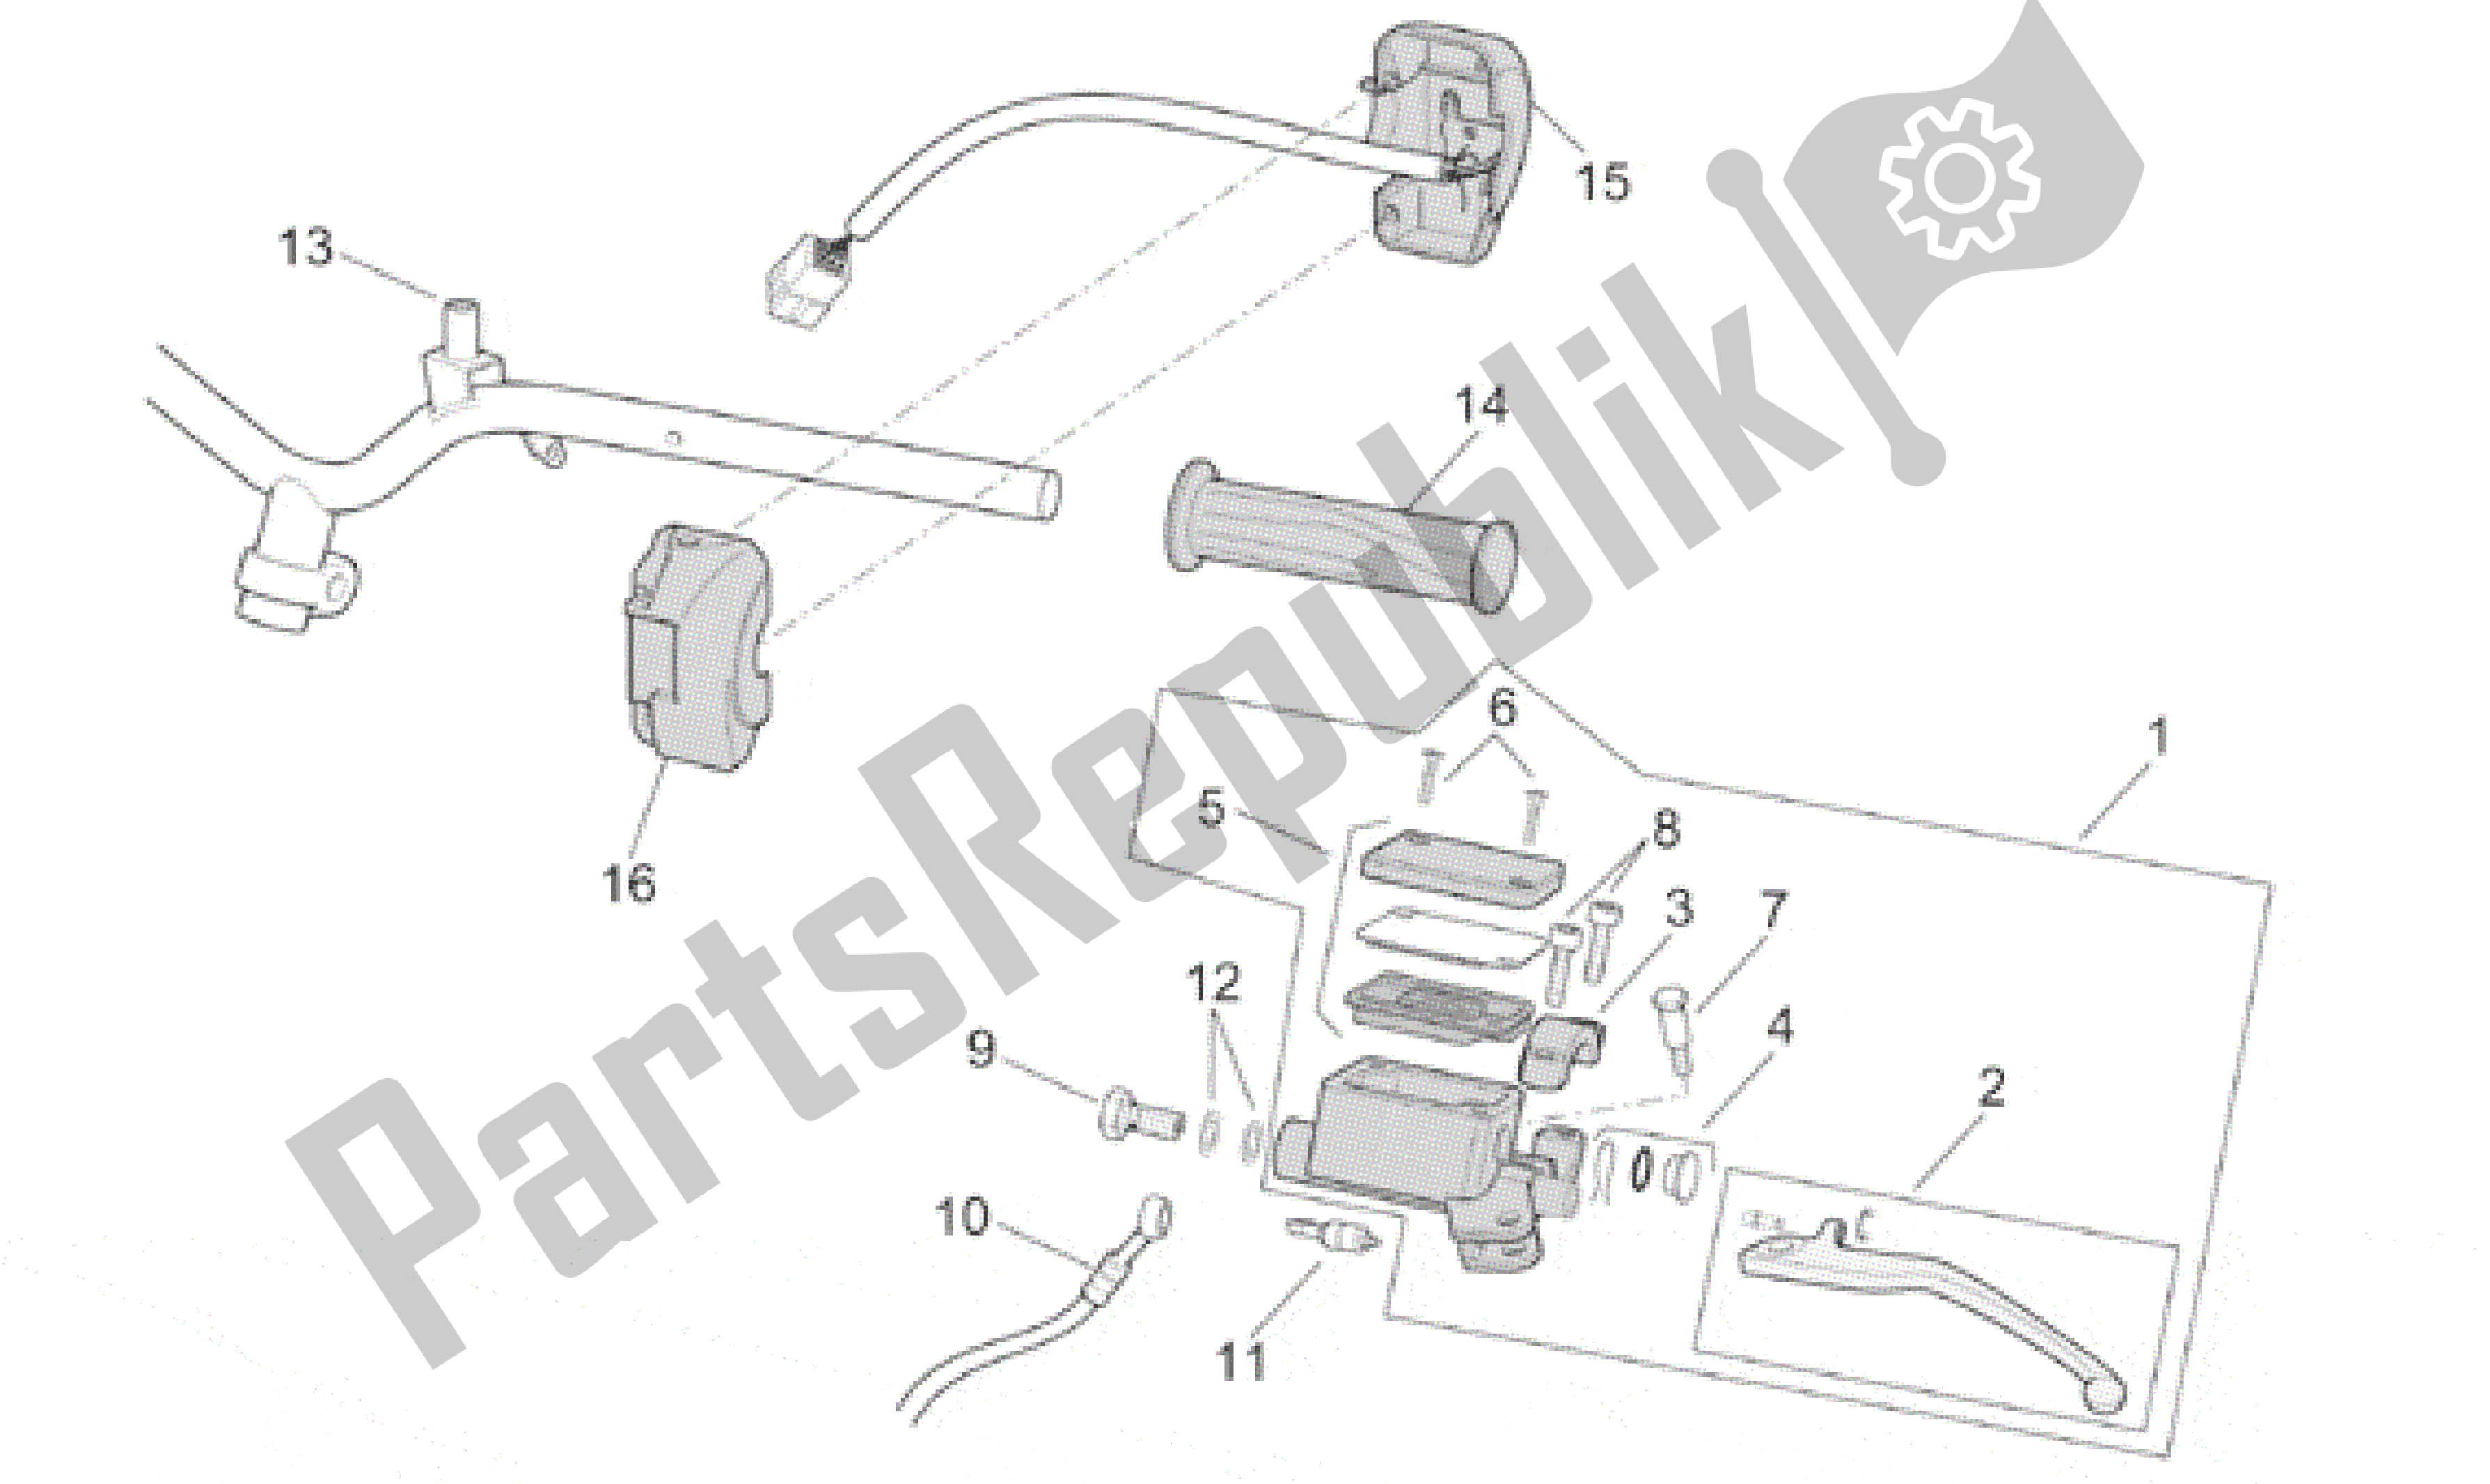 All parts for the Lh Controls of the Aprilia Scarabeo 50 2001 - 2004